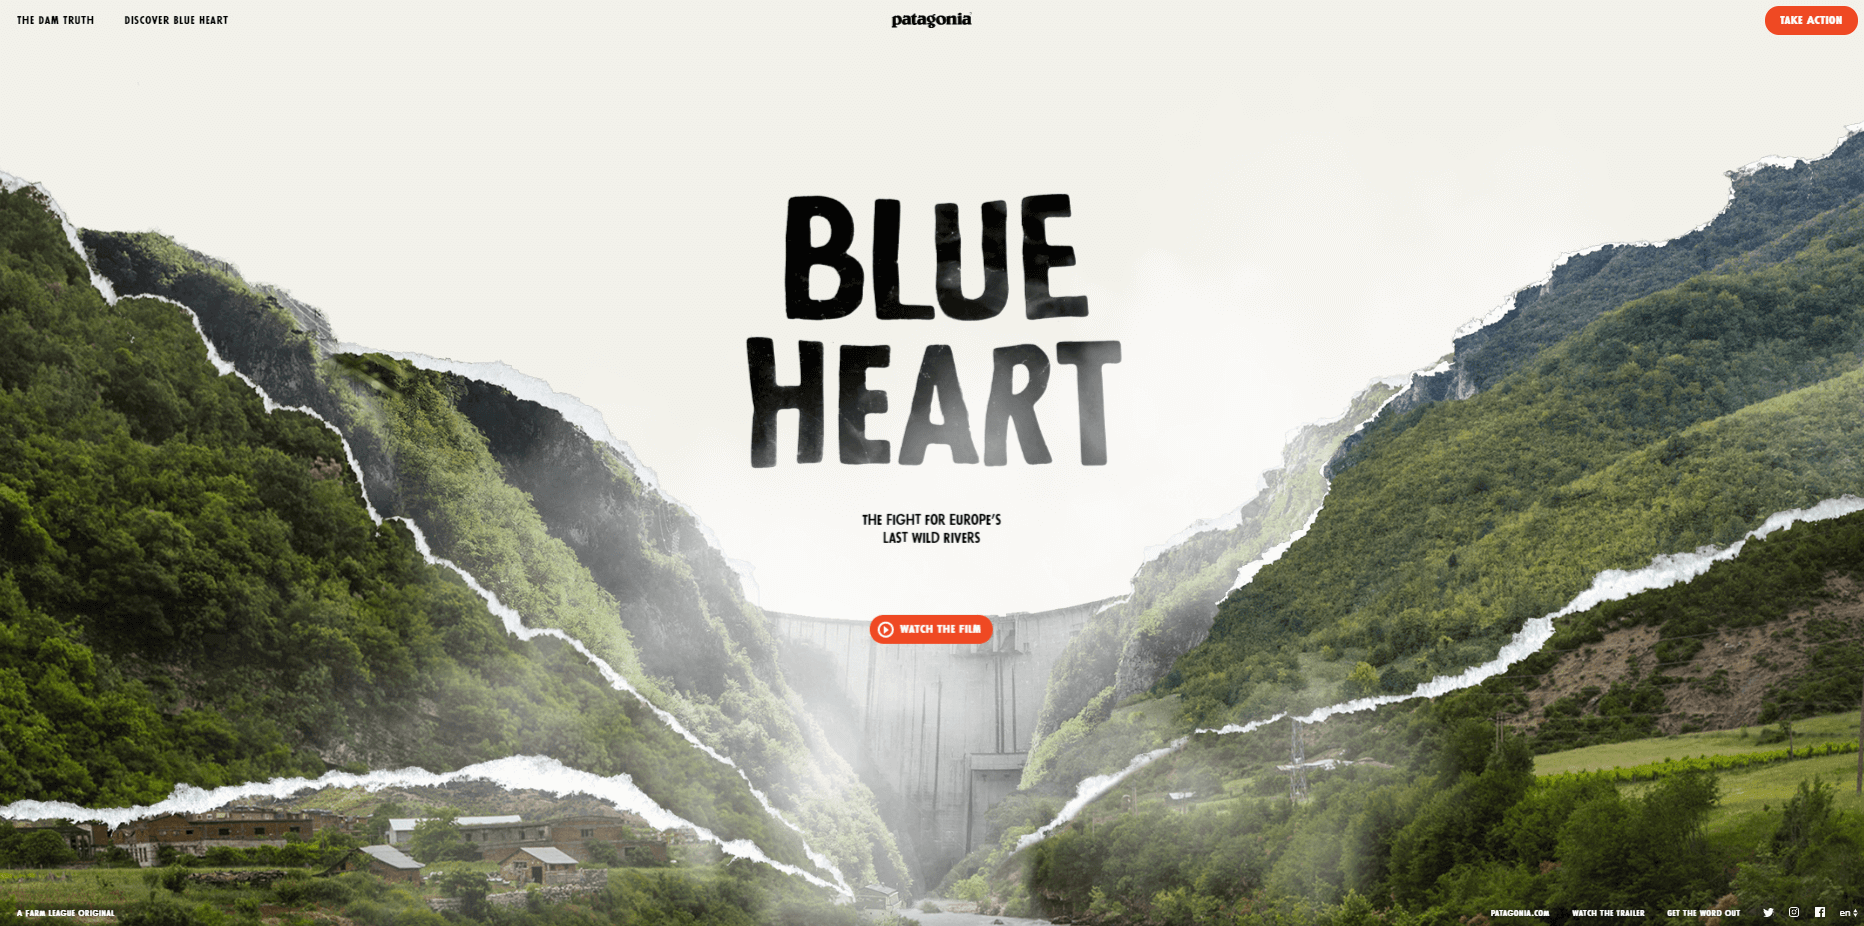 Microsite example - Patagonia's Blue Heart Campaign